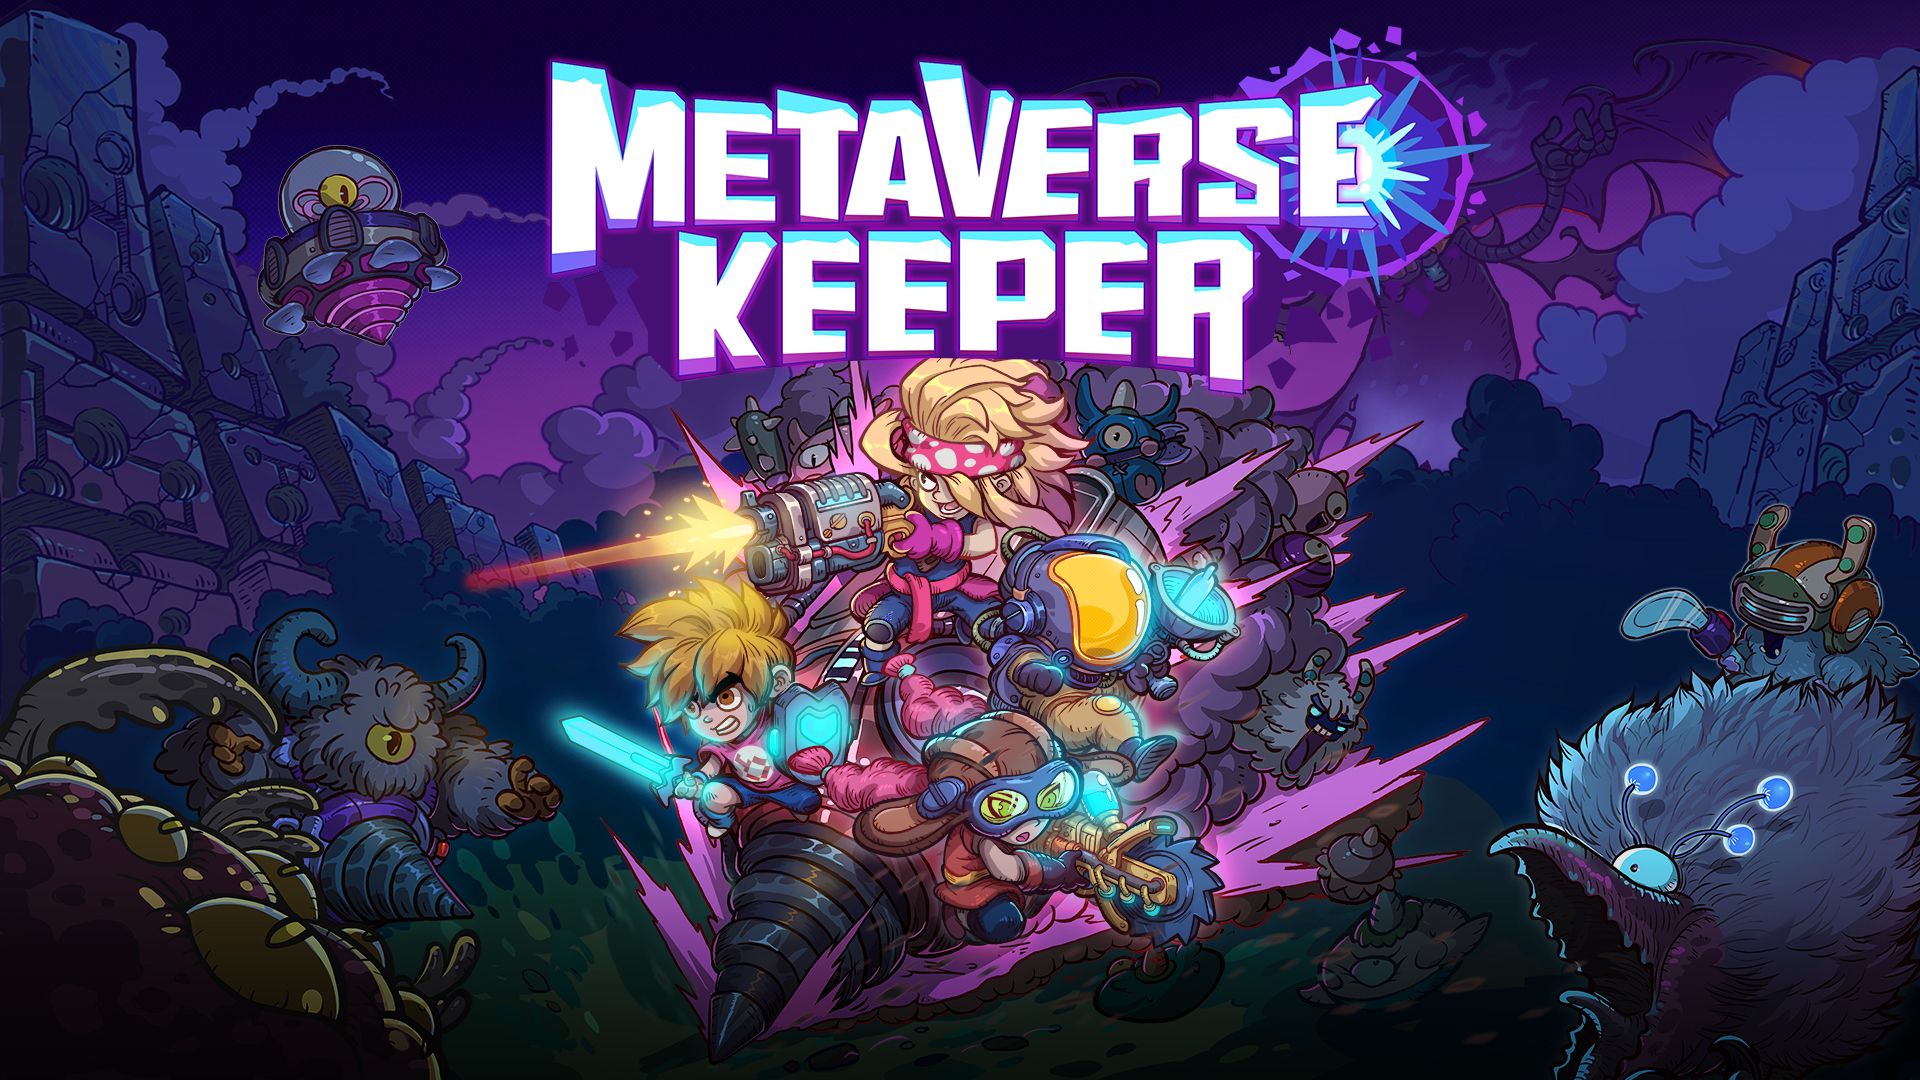 Metaverser download the last version for ios